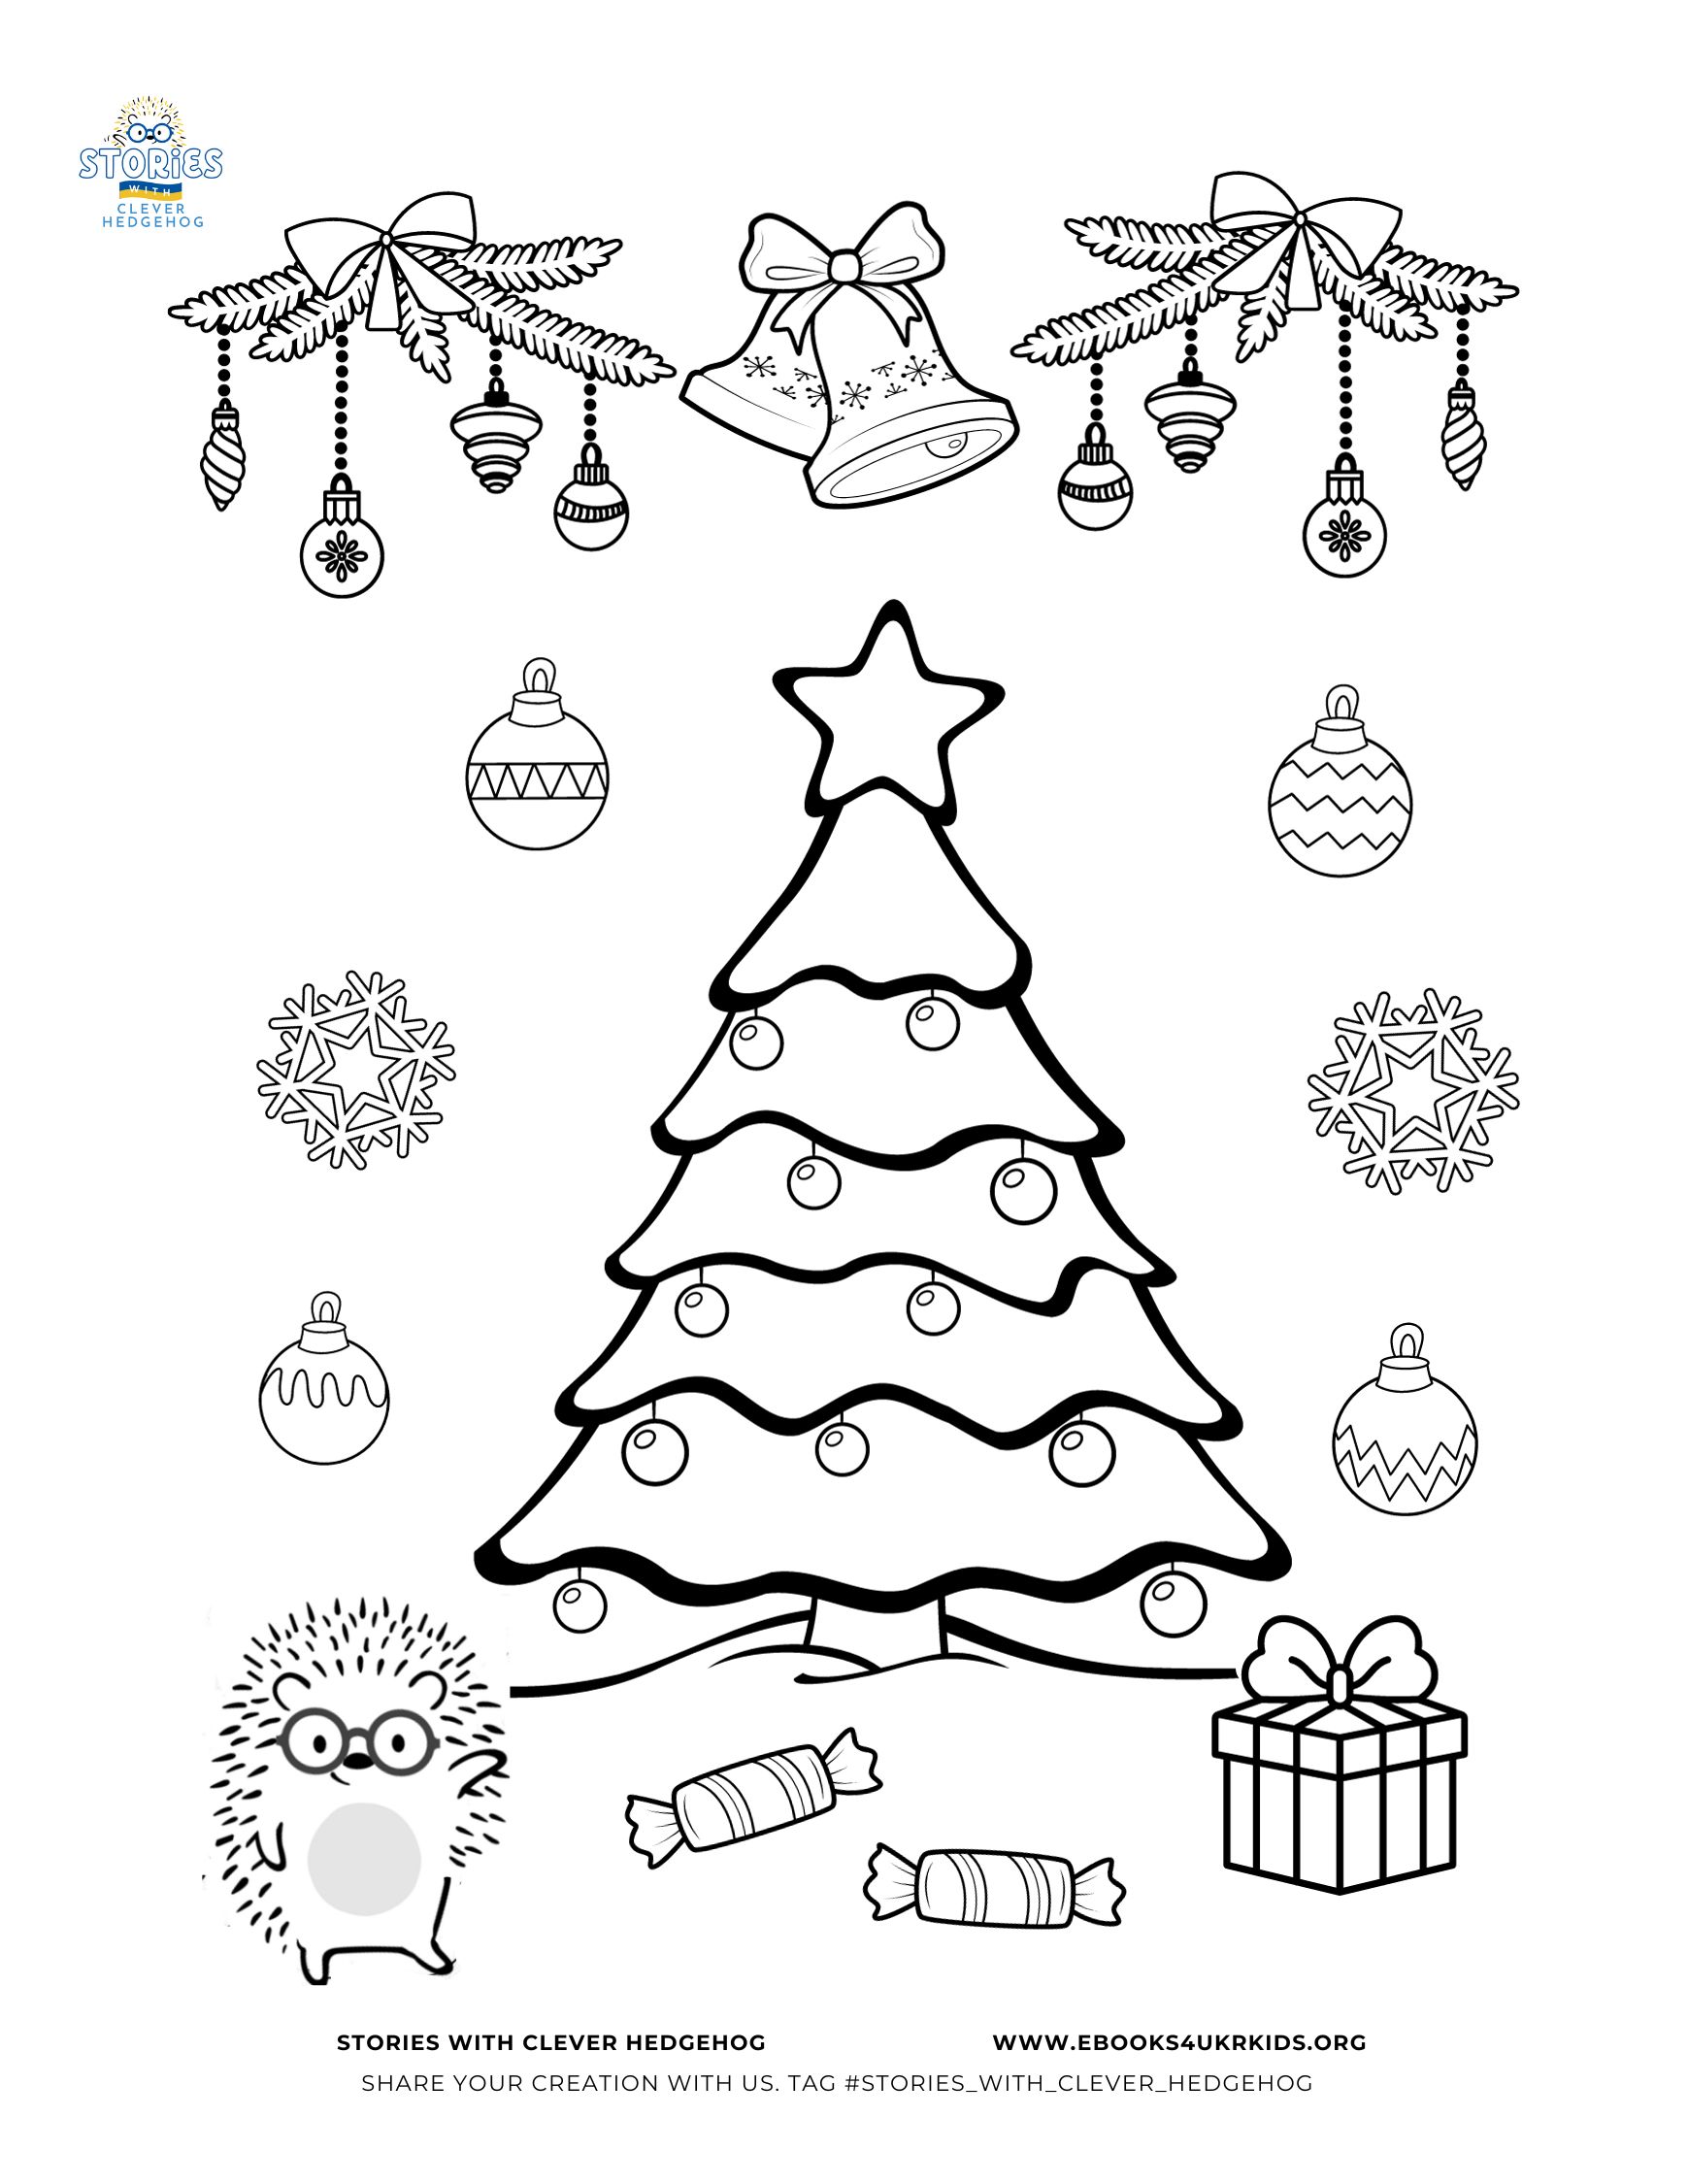 Coloring page for kids, Stories with Clever Hedgehog